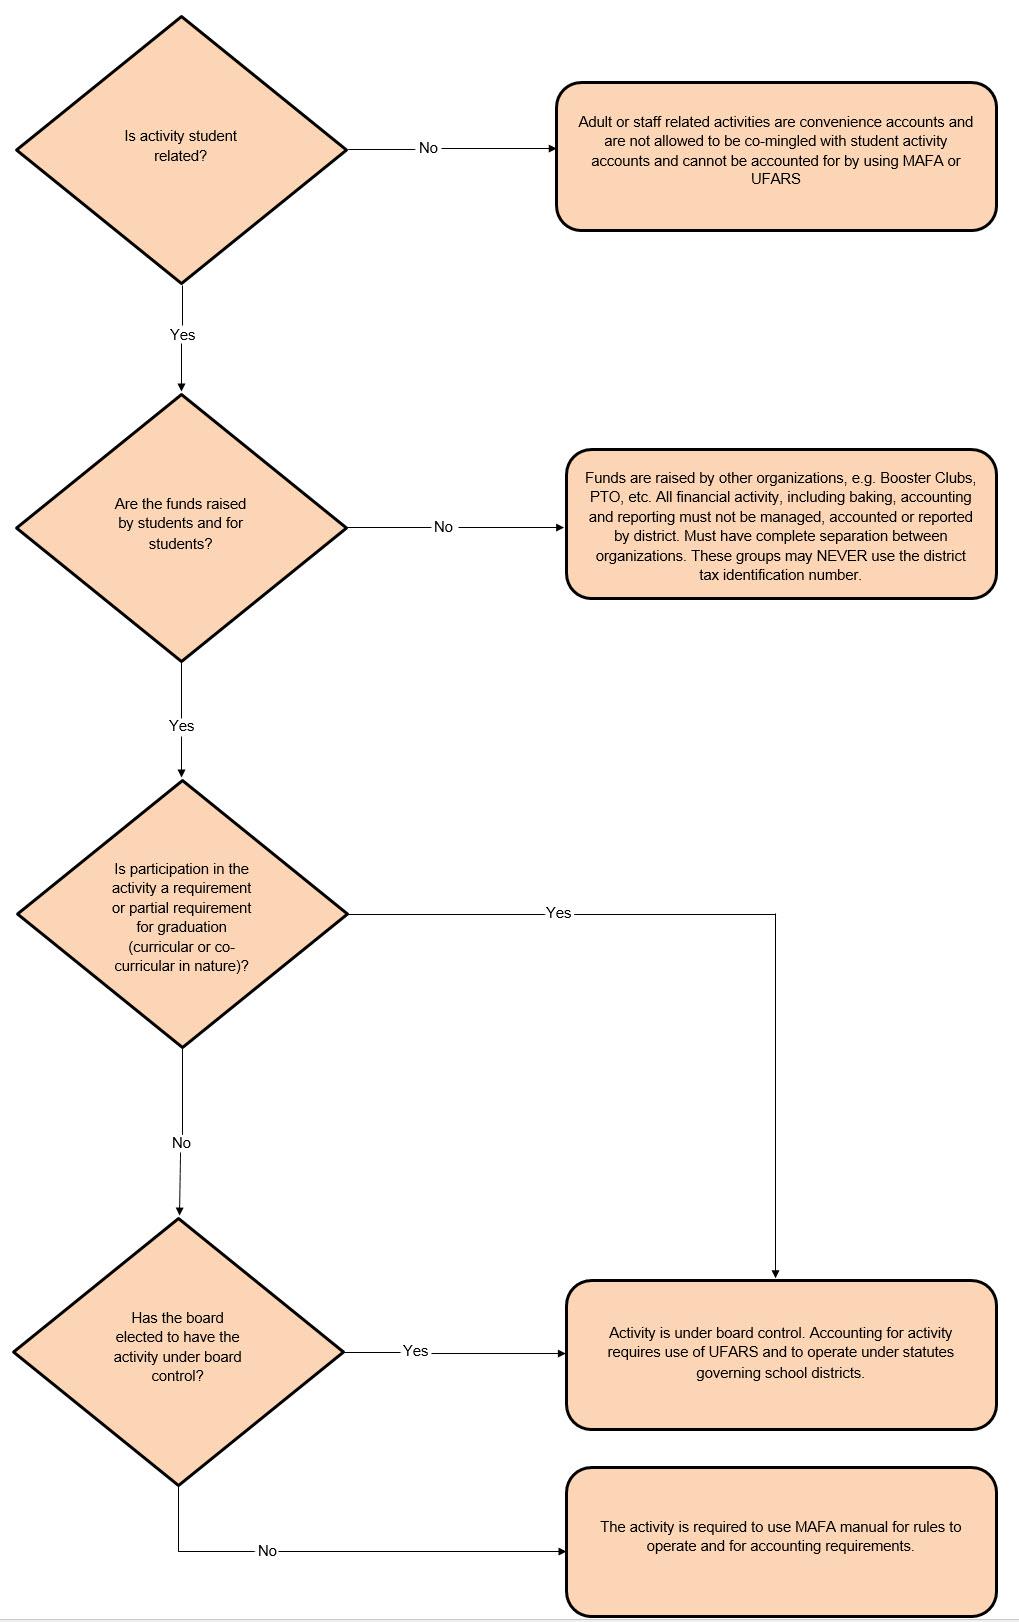 Student Activity Account Decision Tree This decision tree is to assist the board with